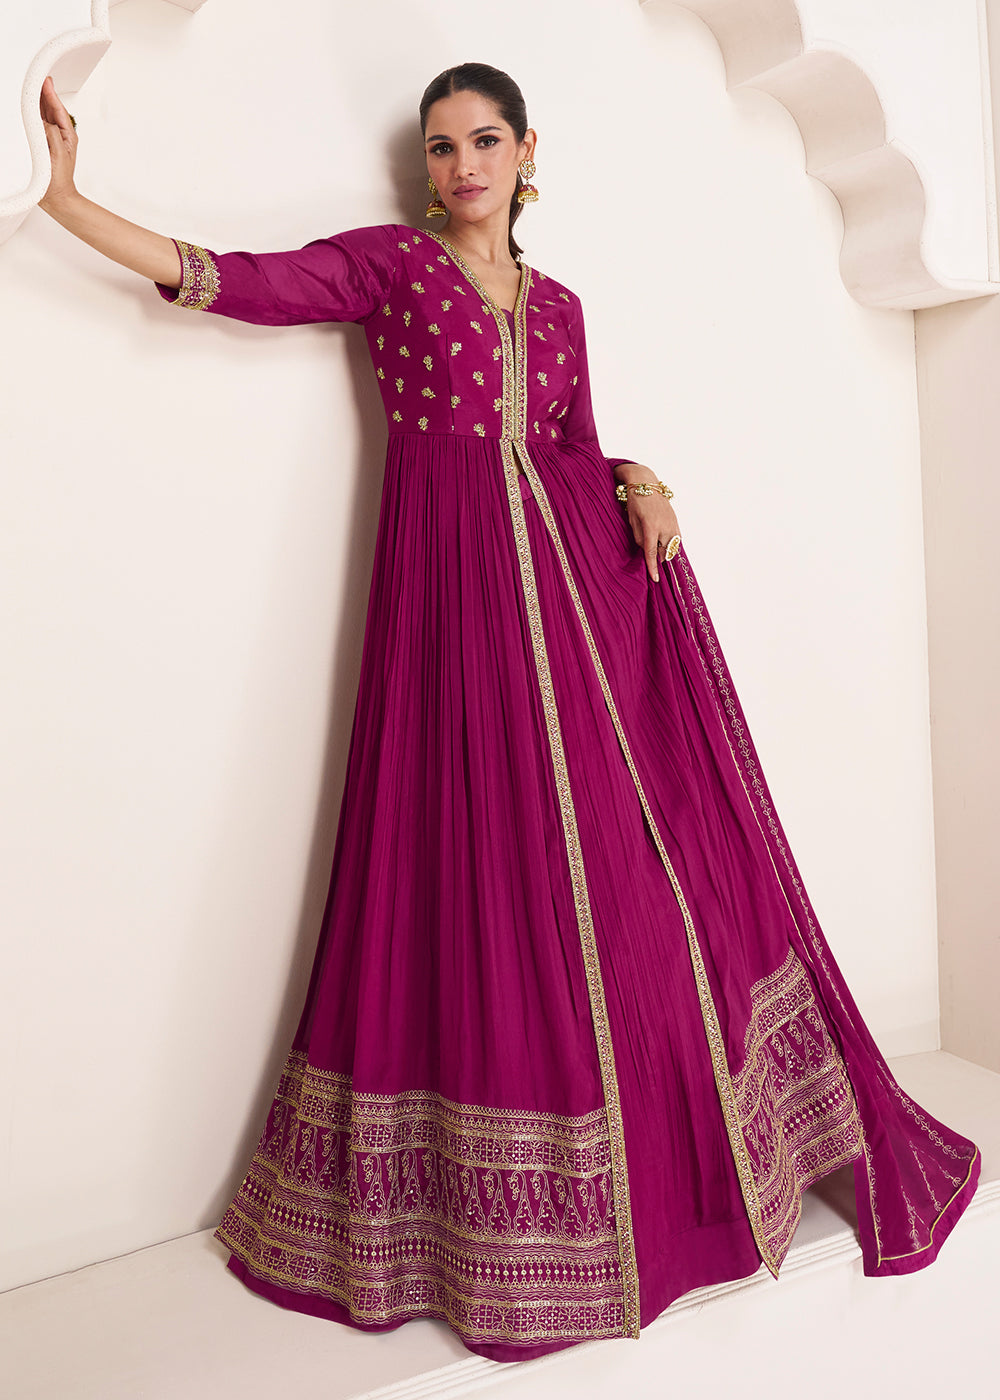 Buy Now Party Magenta Plum Embroidered Skirt Style Anarkali Suit Online in USA, UK, Australia, New Zealand, Canada & Worldwide at Empress Clothing.